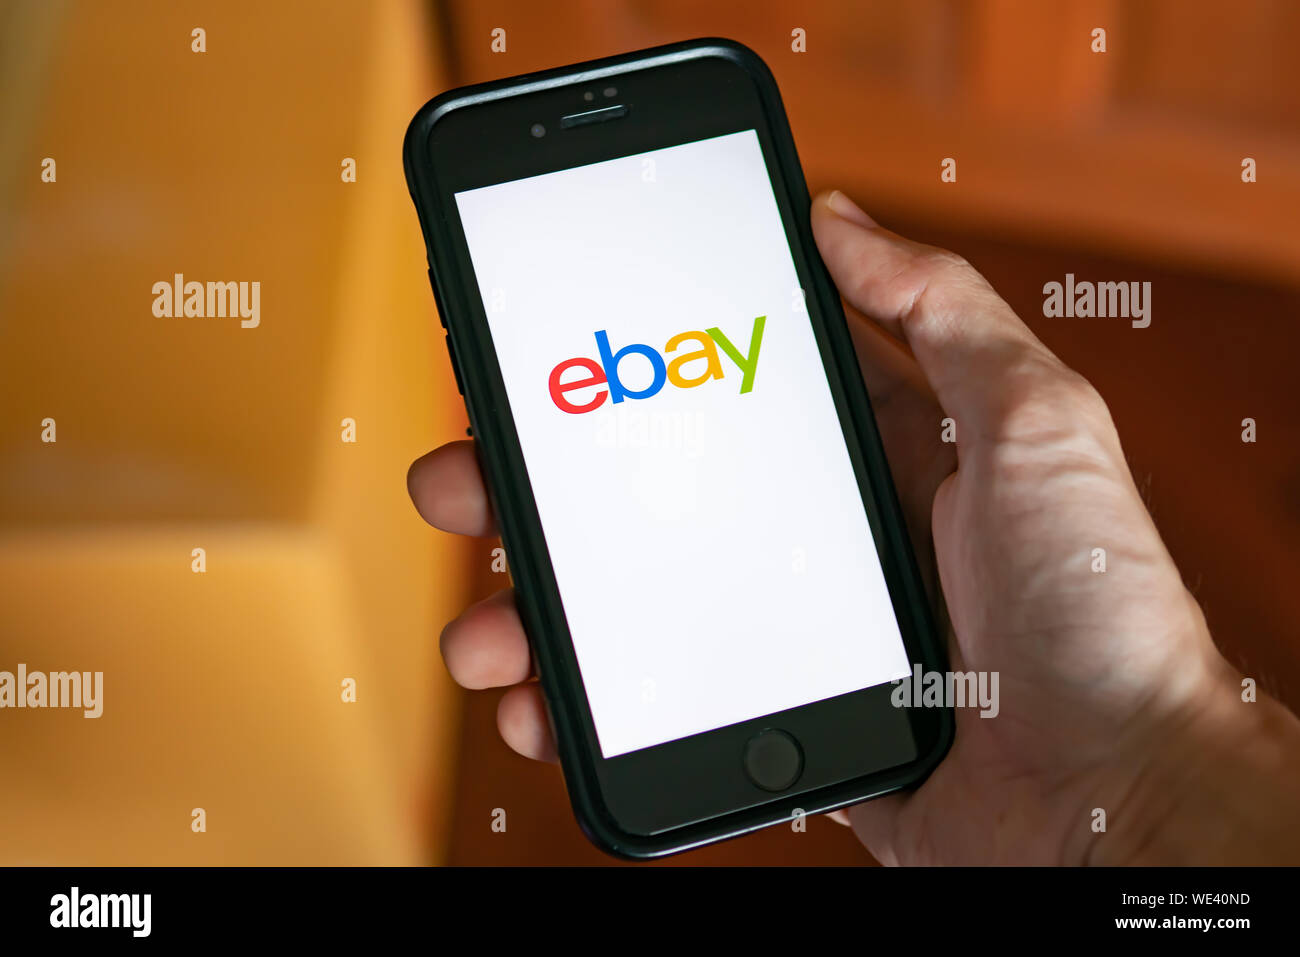 Bangkok, Thailand - August 22, 2019 : iPhone 7 showing its screen with eBay application. Stock Photo